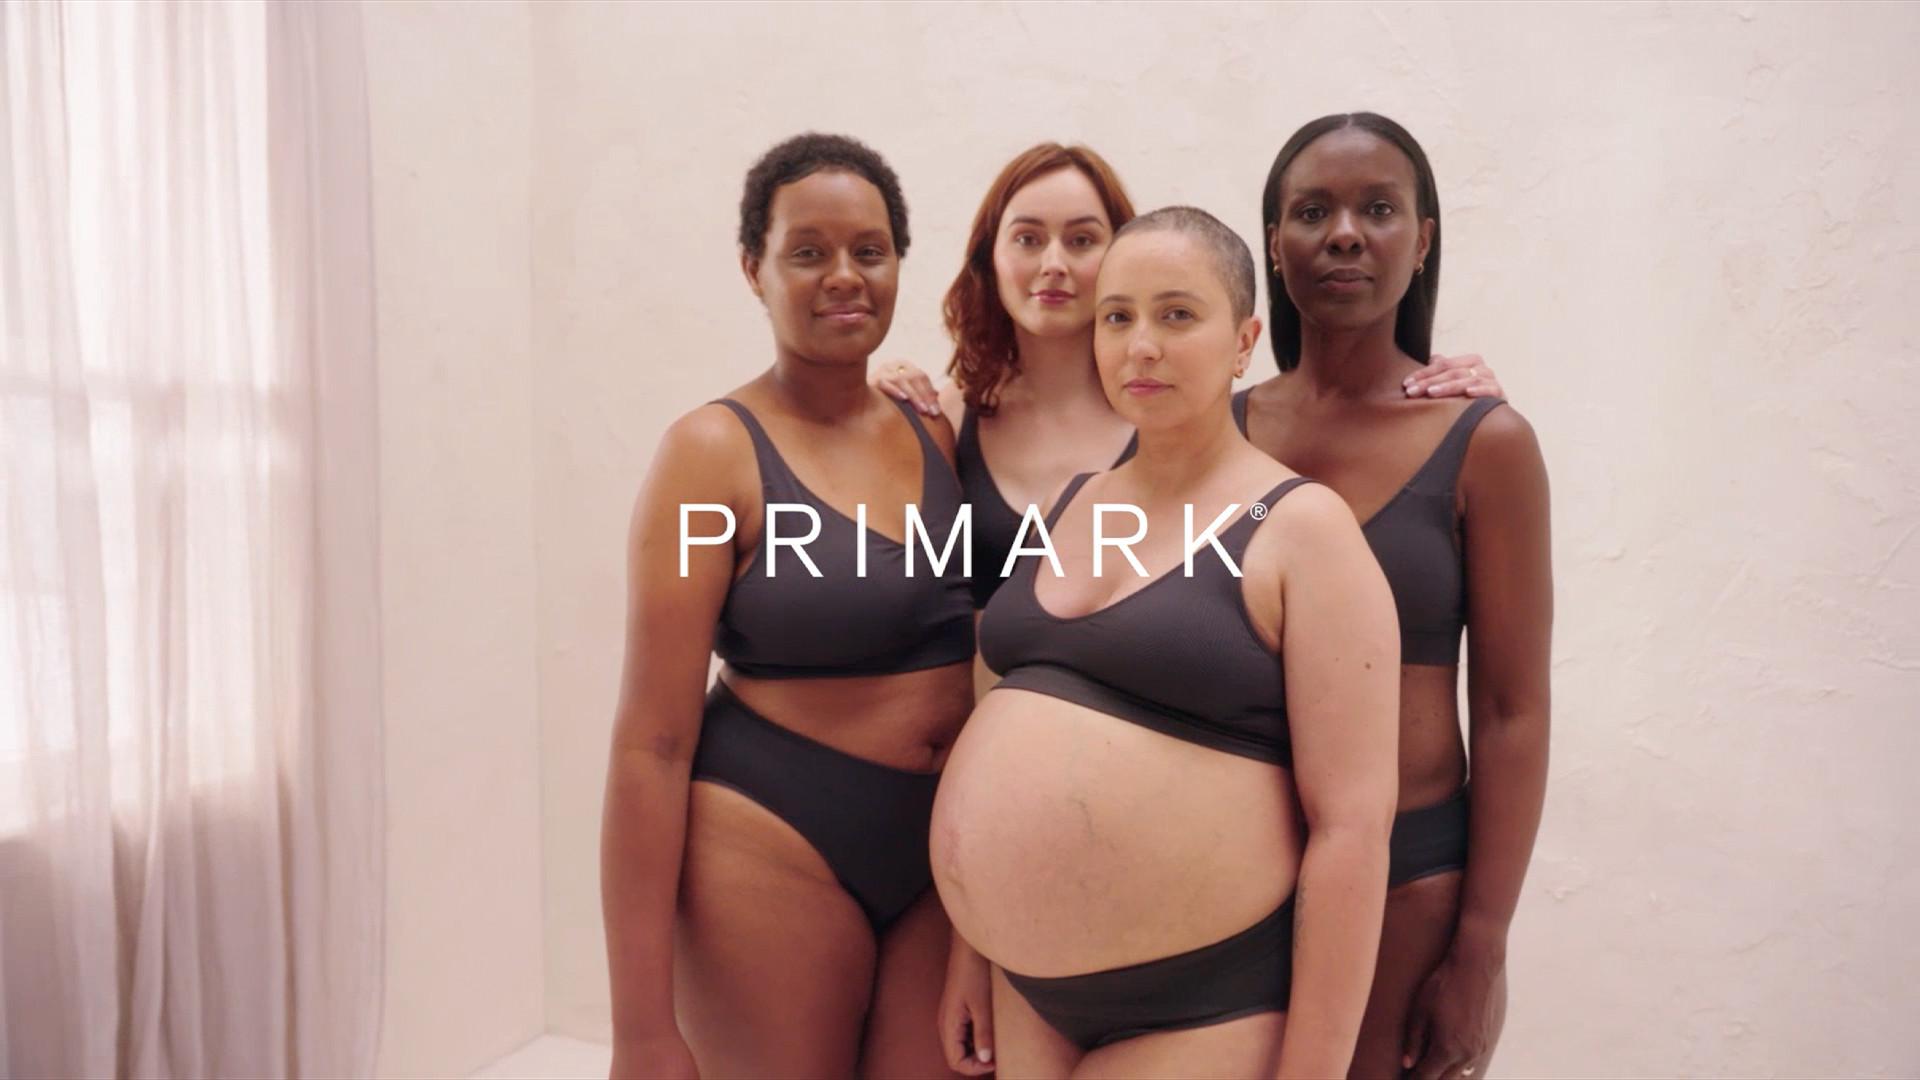 Primark latest breast cancer collection, campaign comes with £1m